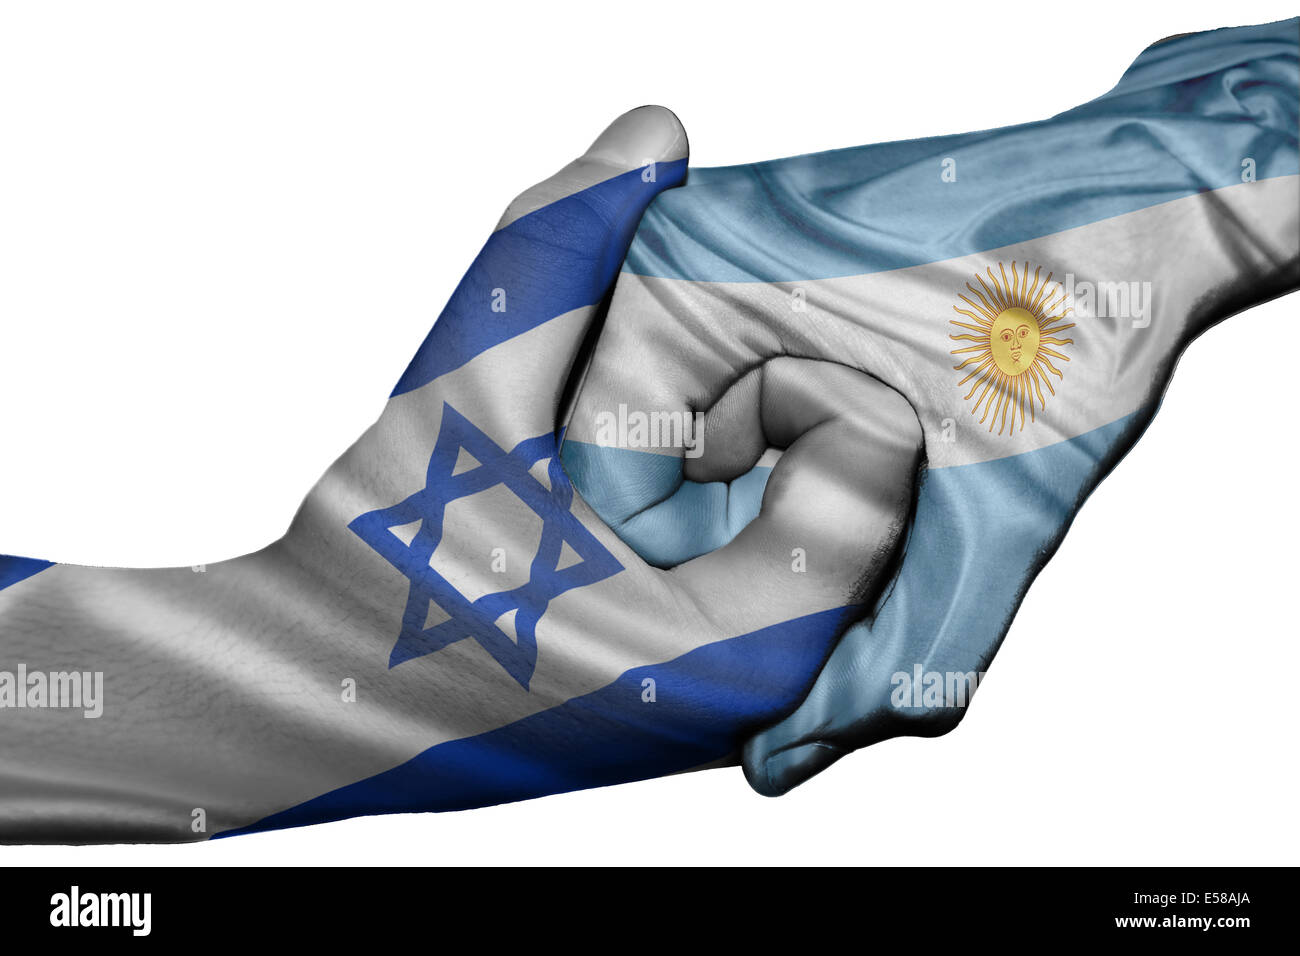 Diplomatic handshake between countries: flags of Israel and Argentina overprinted the two hands Stock Photo